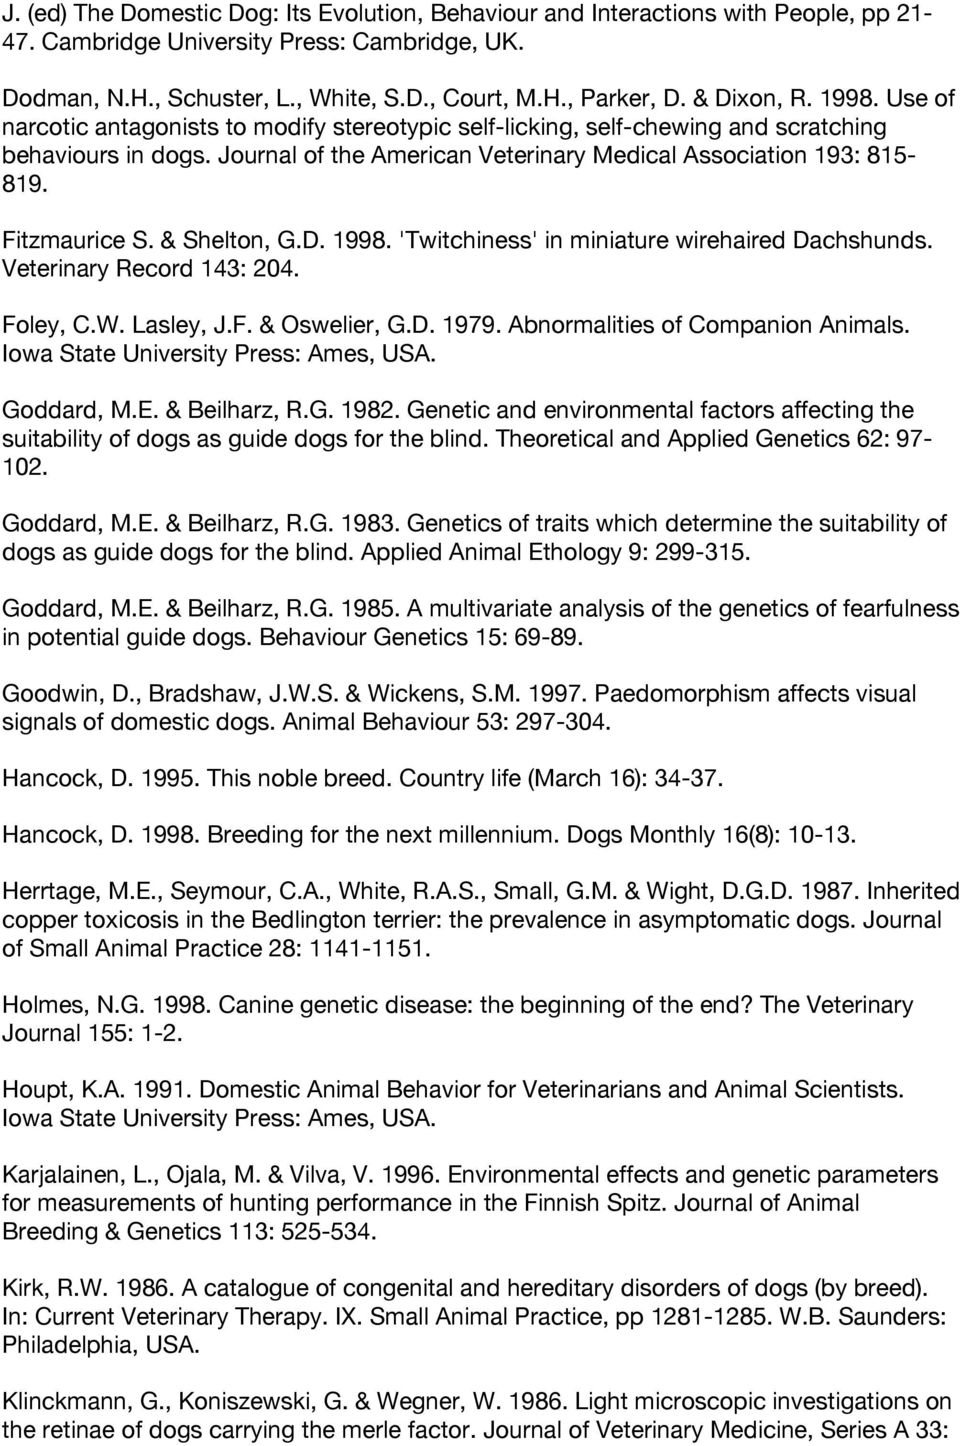 Fitzmaurice S. & Shelton, G.D. 1998. 'Twitchiness' in miniature wirehaired Dachshunds. Veterinary Record 143: 204. Foley, C.W. Lasley, J.F. & Oswelier, G.D. 1979. Abnormalities of Companion Animals.